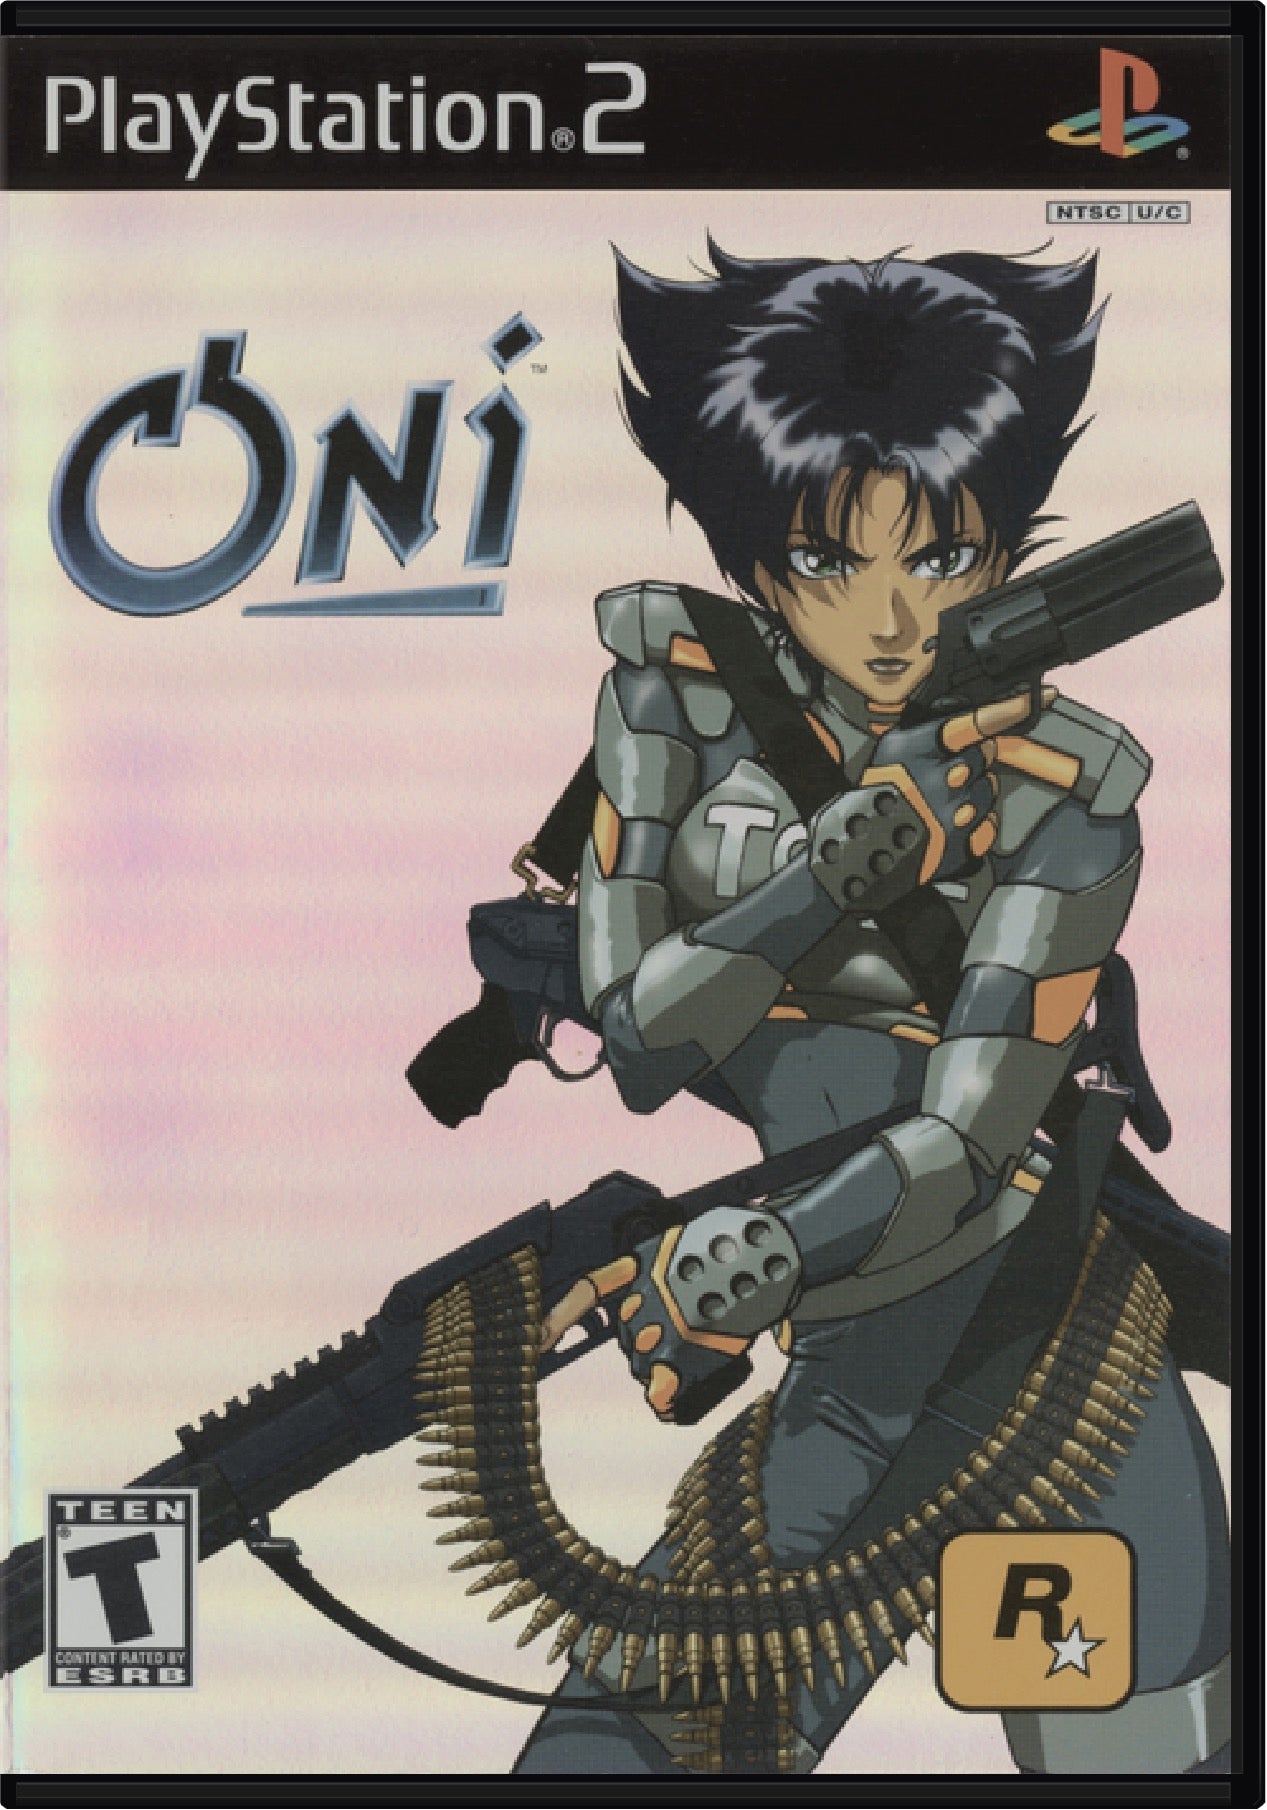 Oni Cover Art and Product Photo